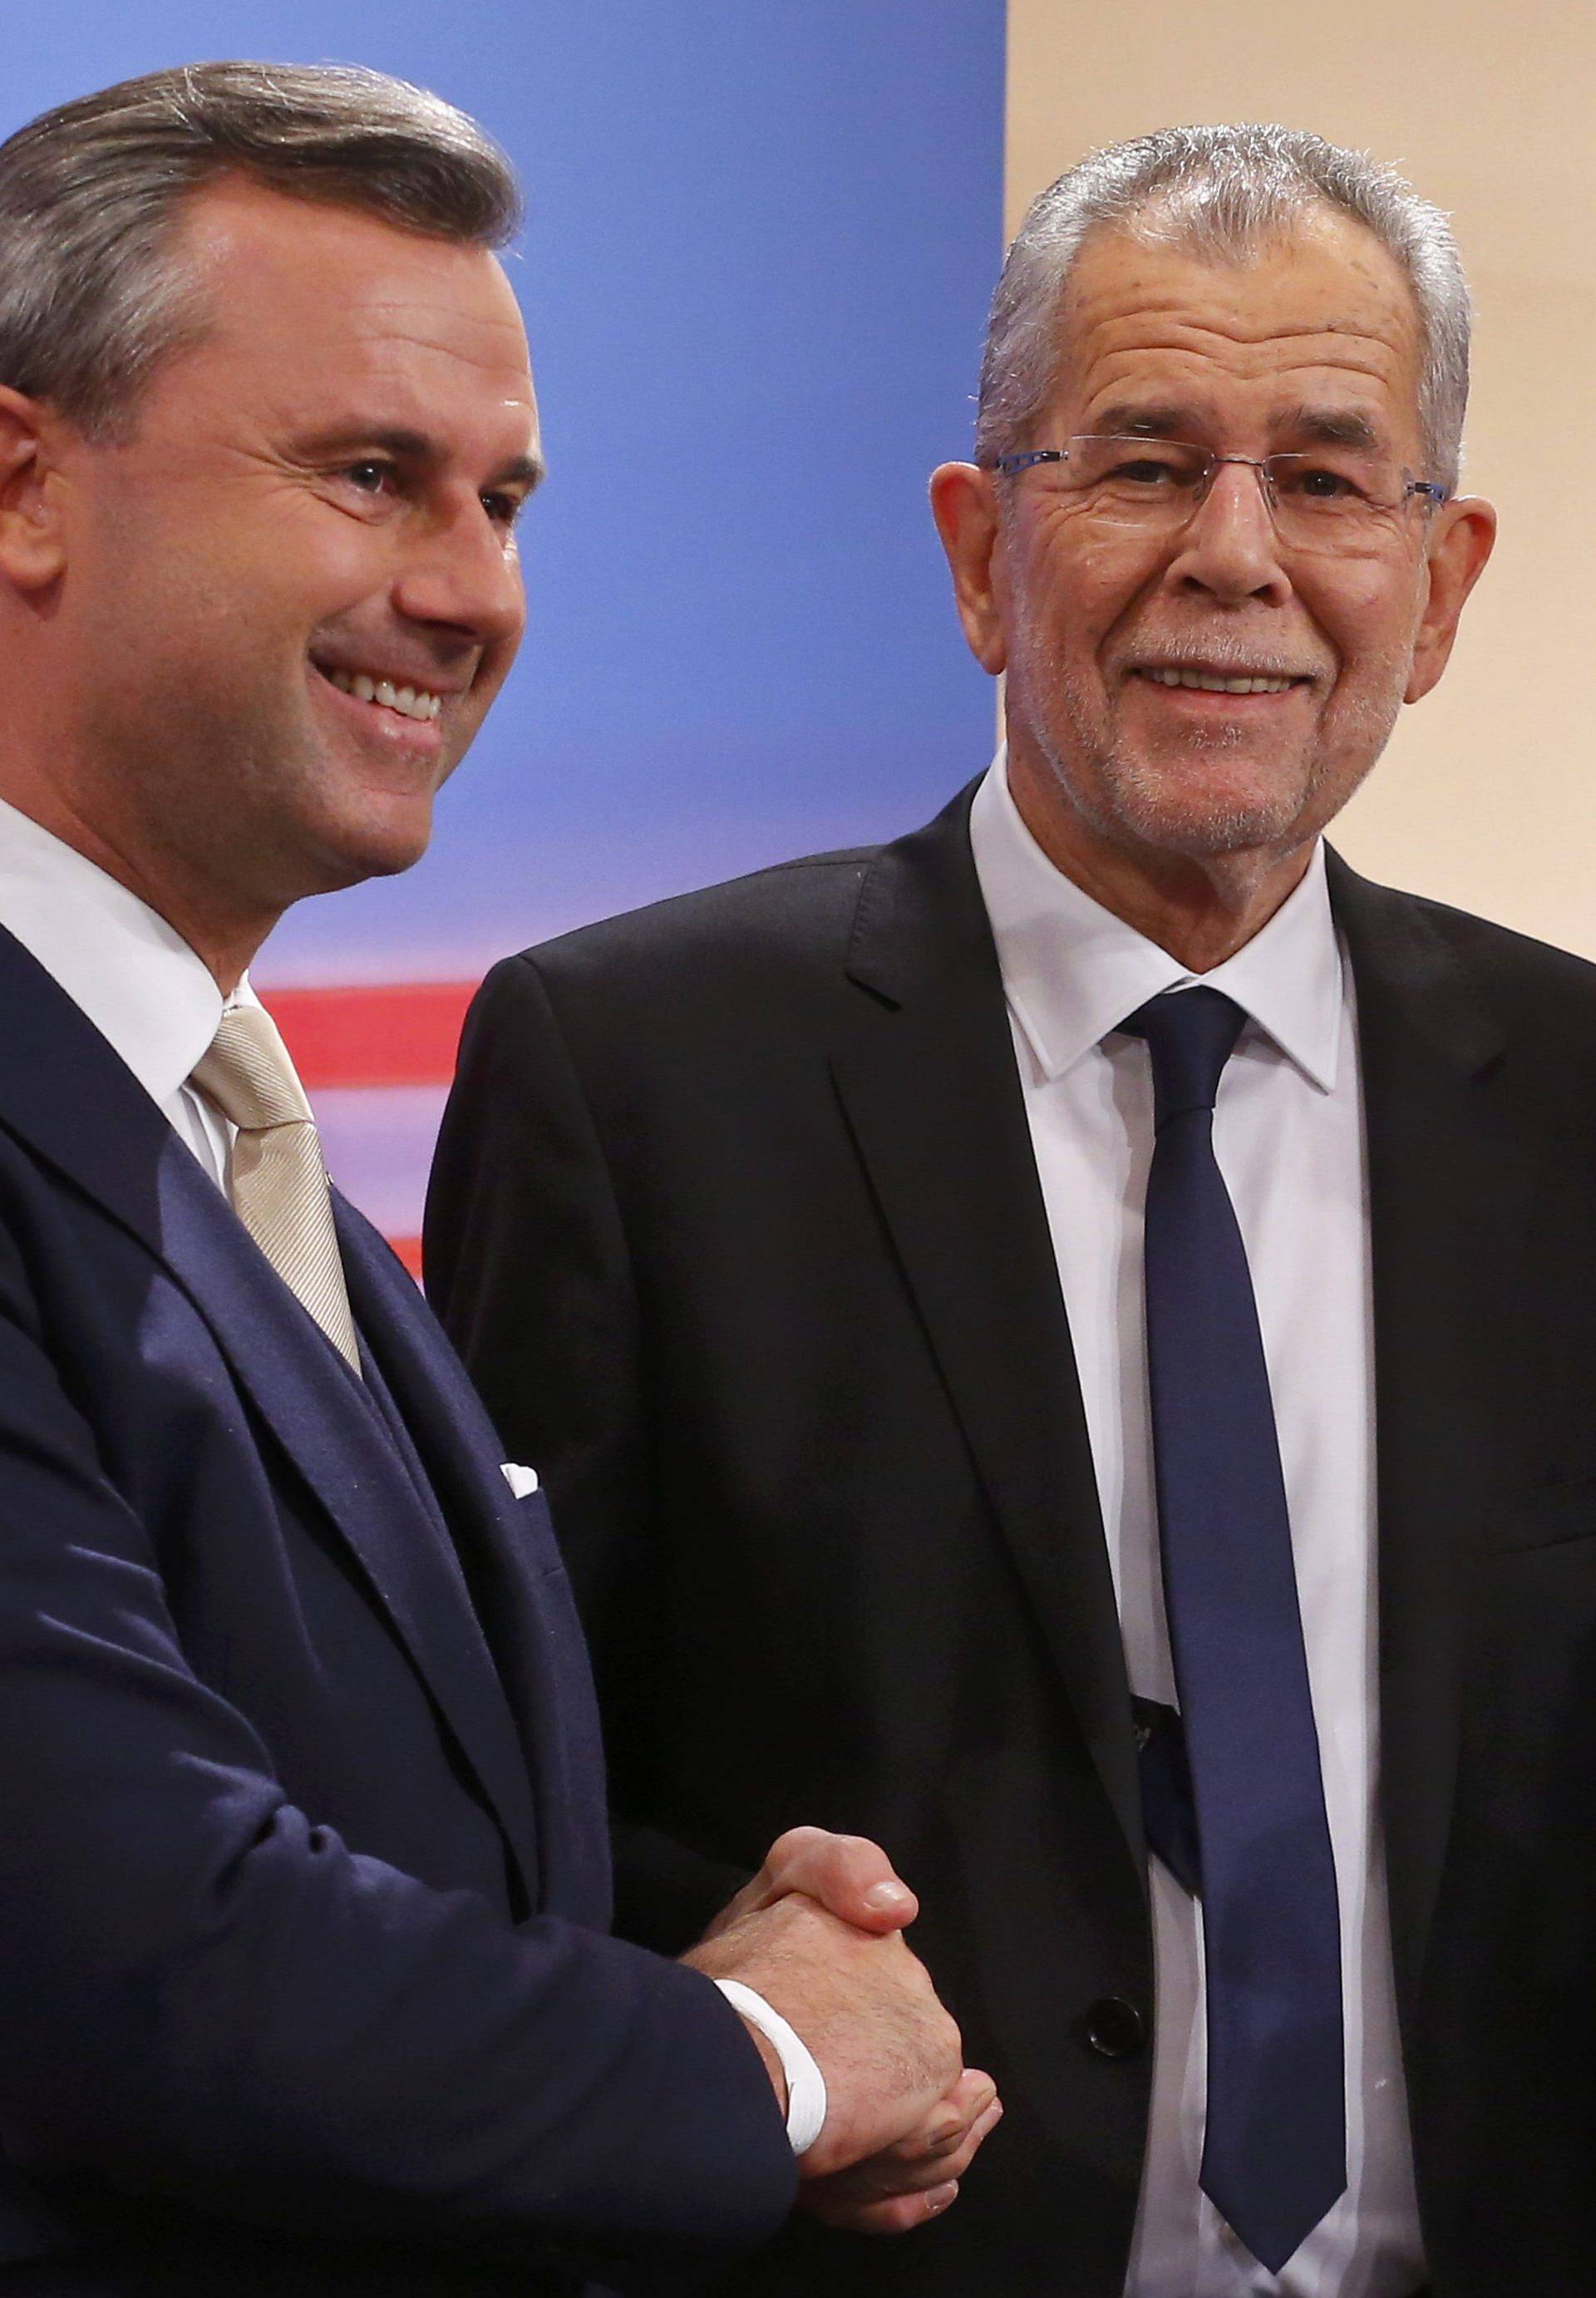 Austrian far-right Freedom Party (FPOe) presidential candidate Hofer and his rival Van der Bellen, who is supported by the Greens, react during a TV show in Vienna